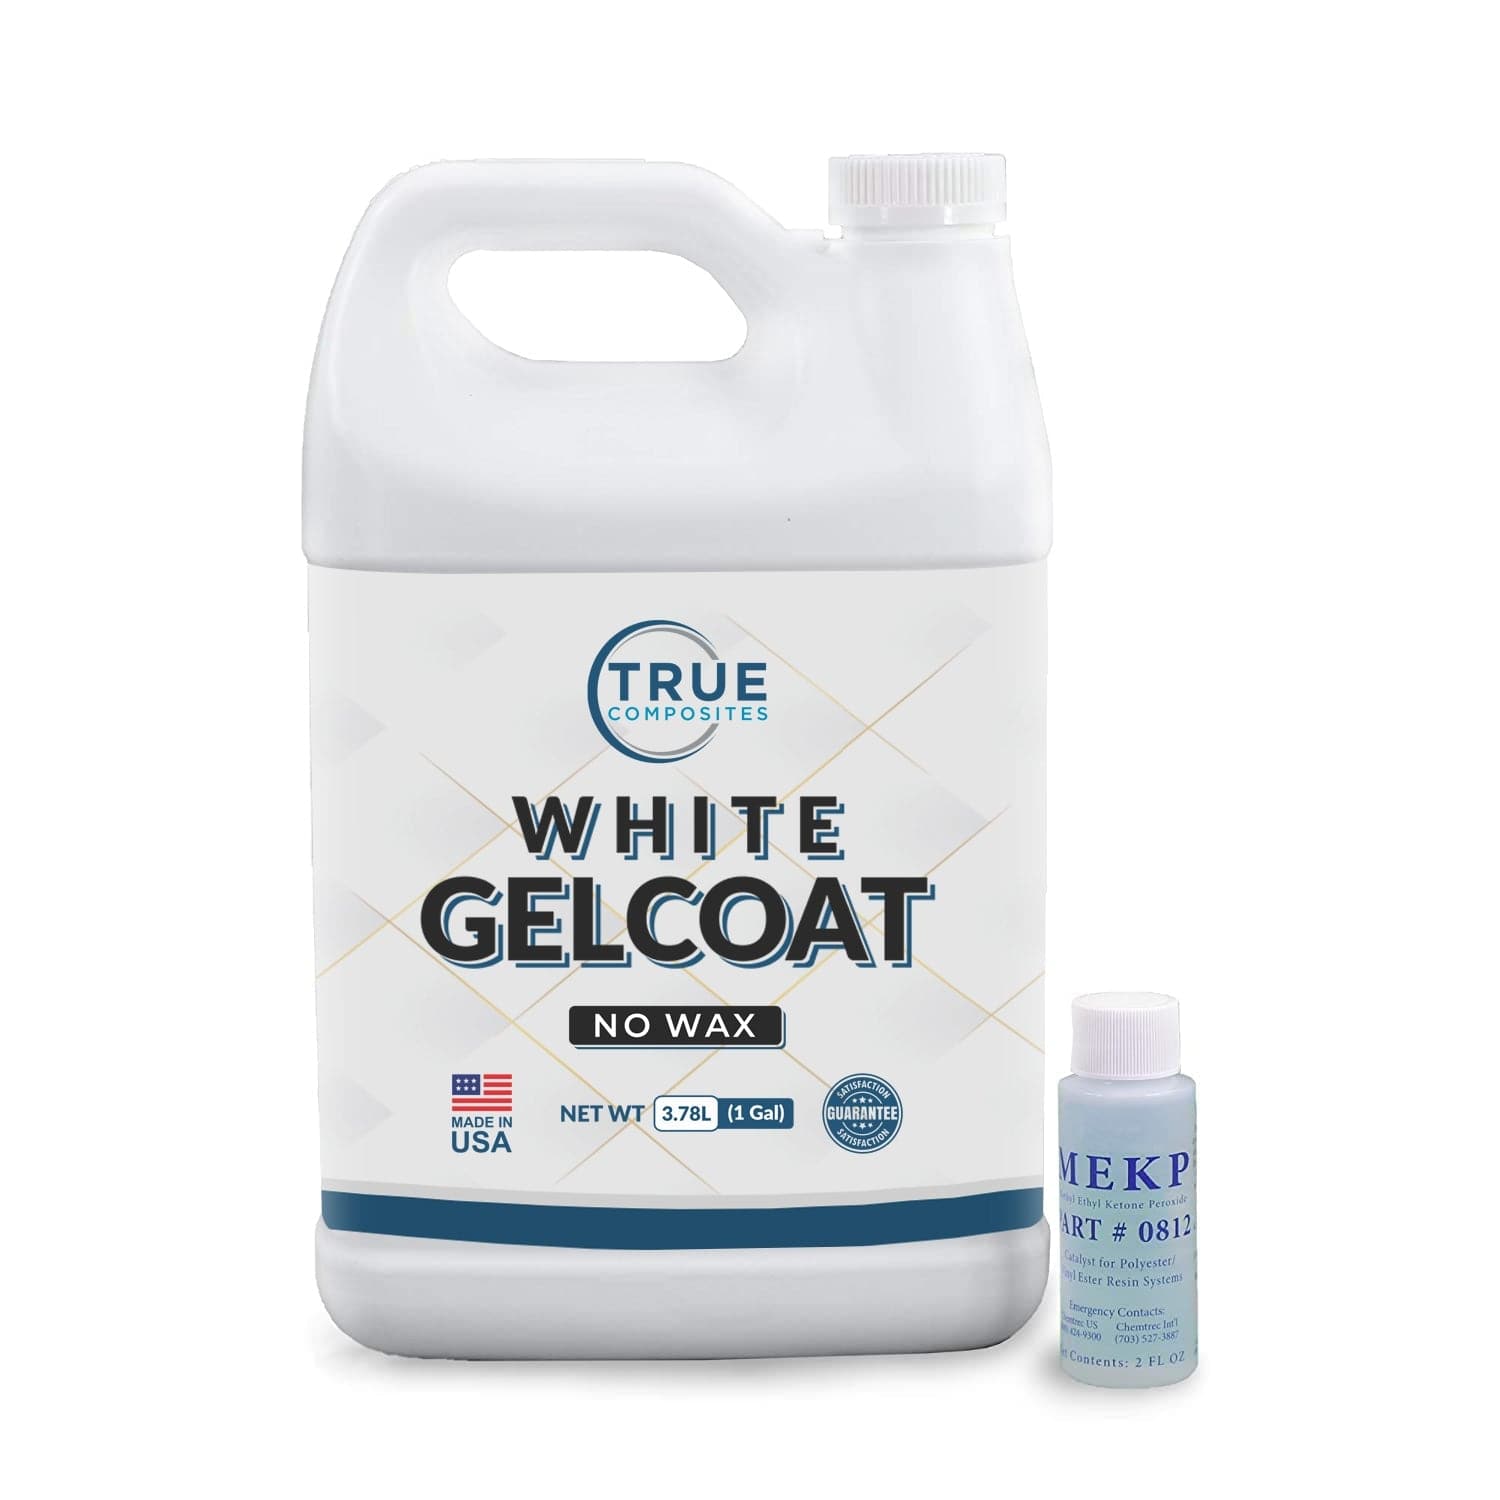 Clear Gelcoat Paste - Multi-Tech Products